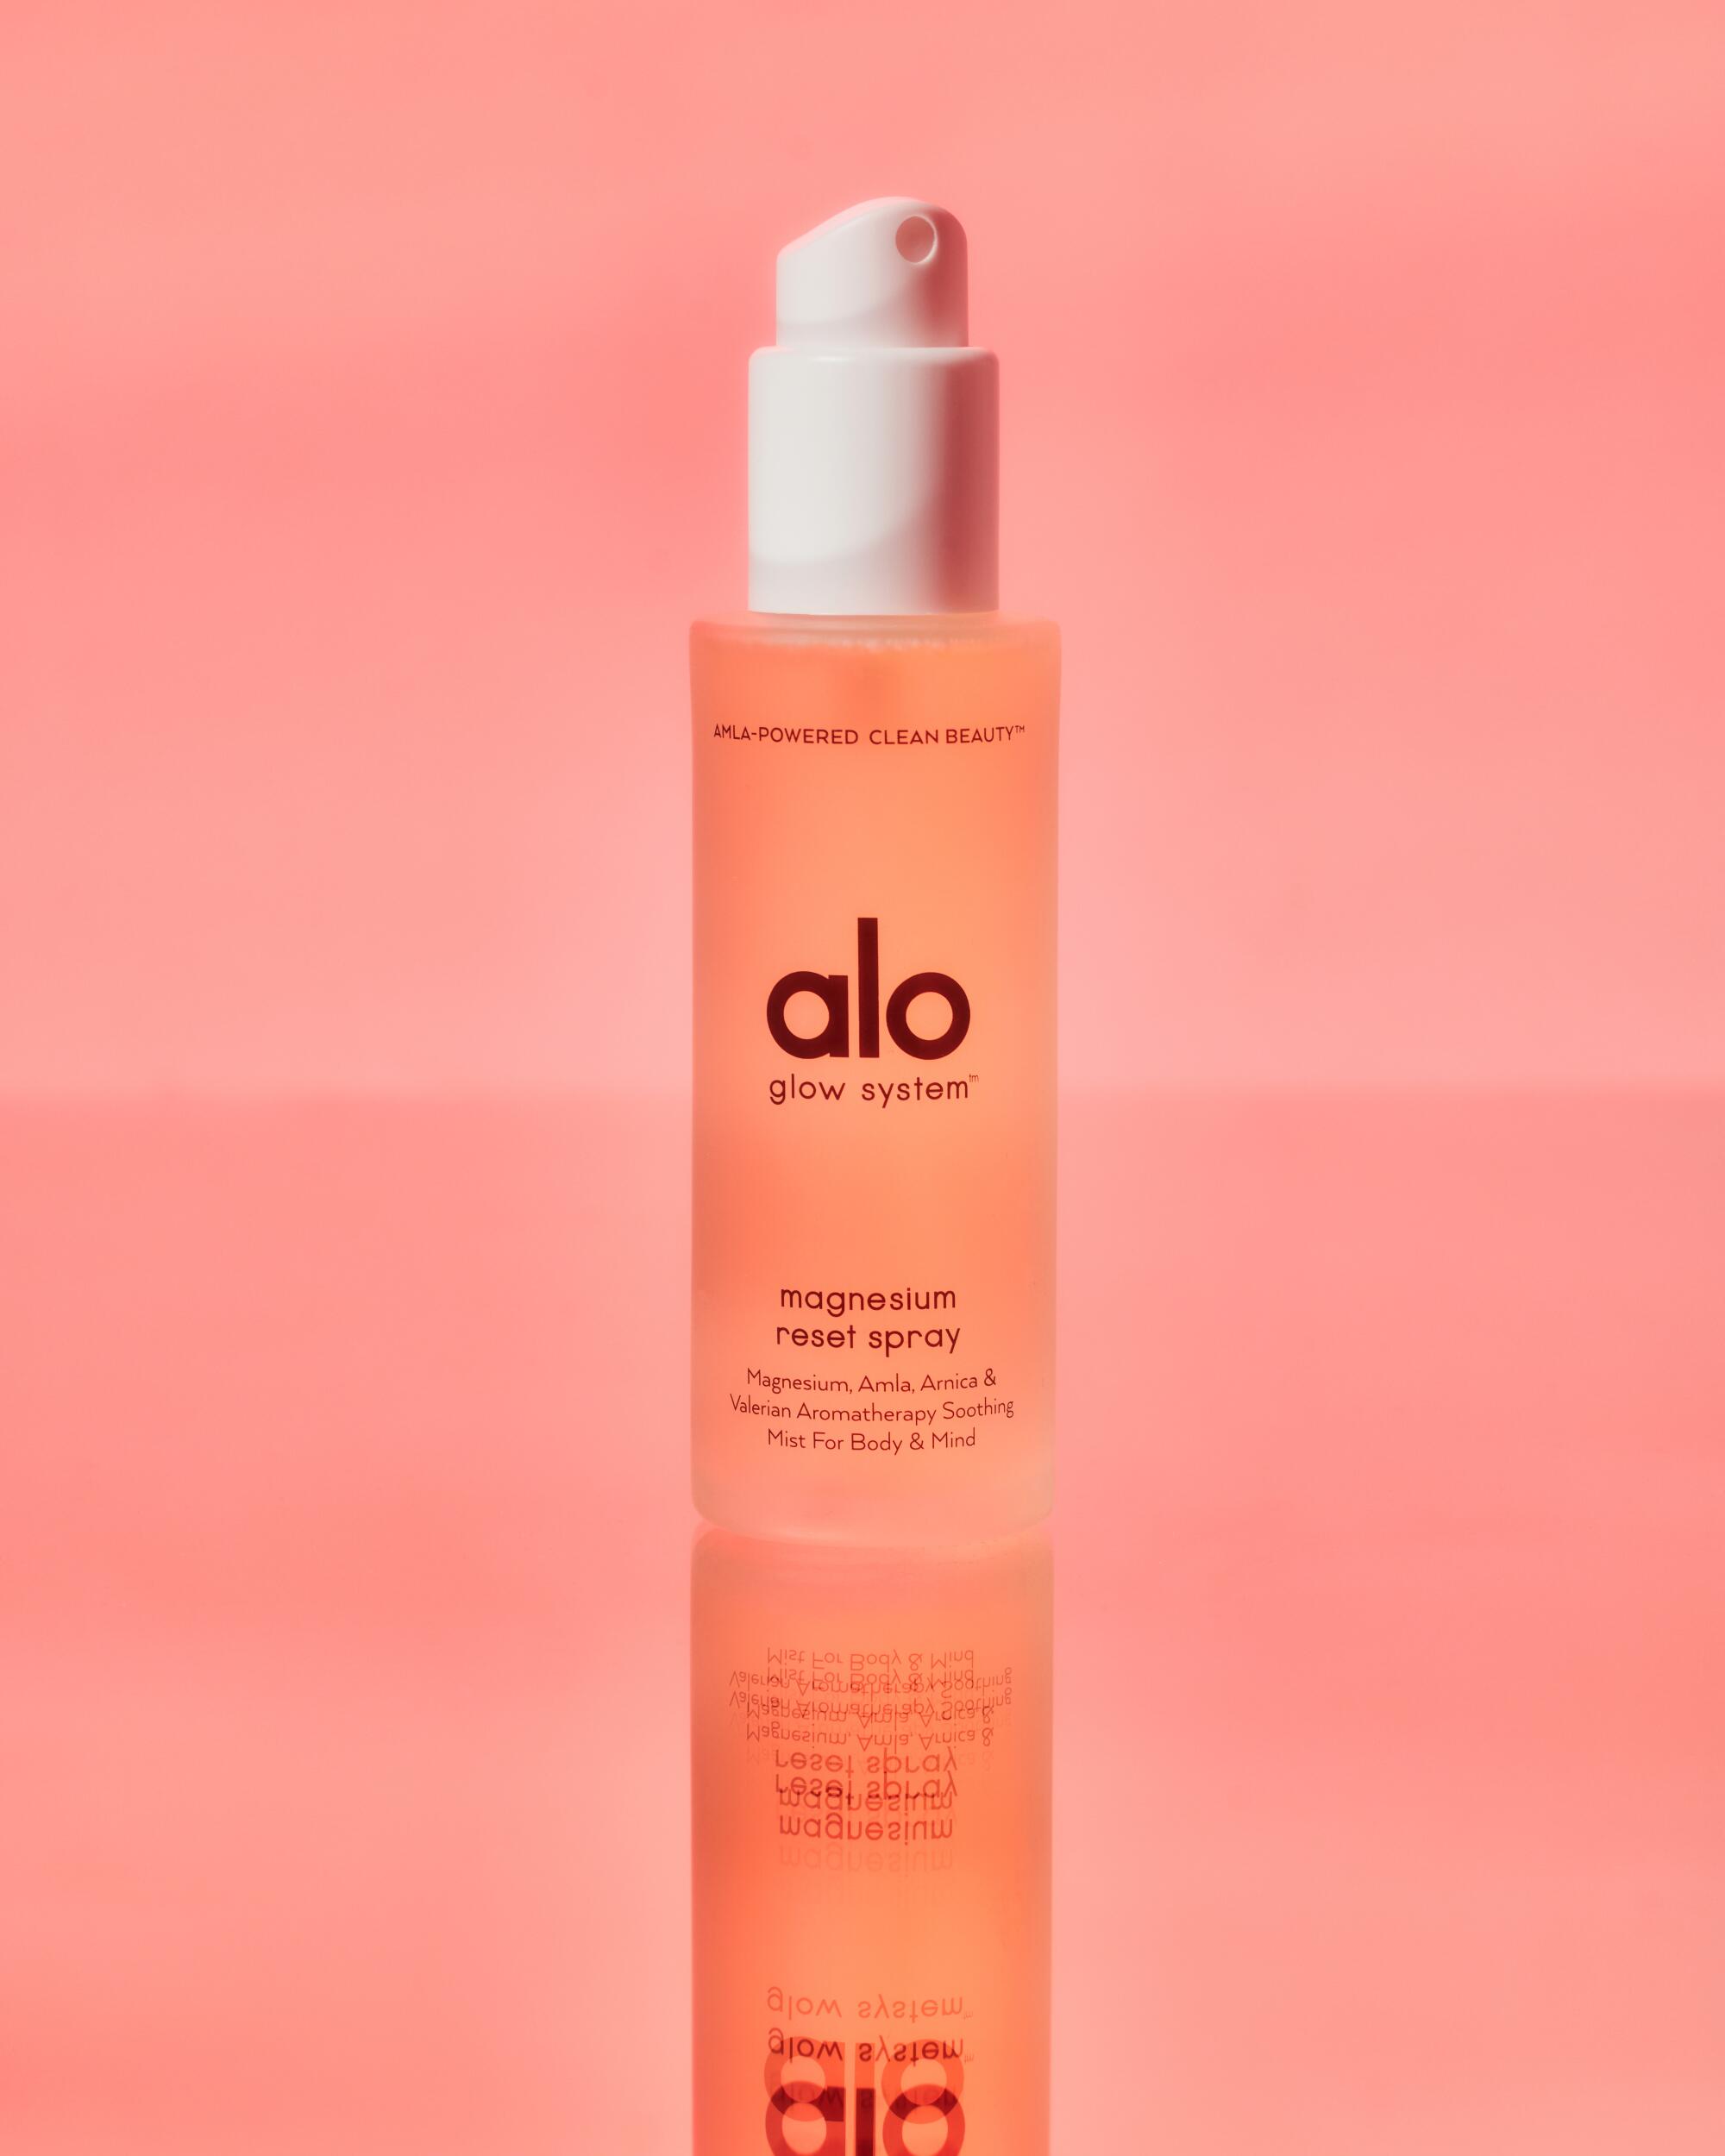 Alo Yoga's Magnesium Reset Spray, for misting over tense muscles or on the soles of your feet before bed.